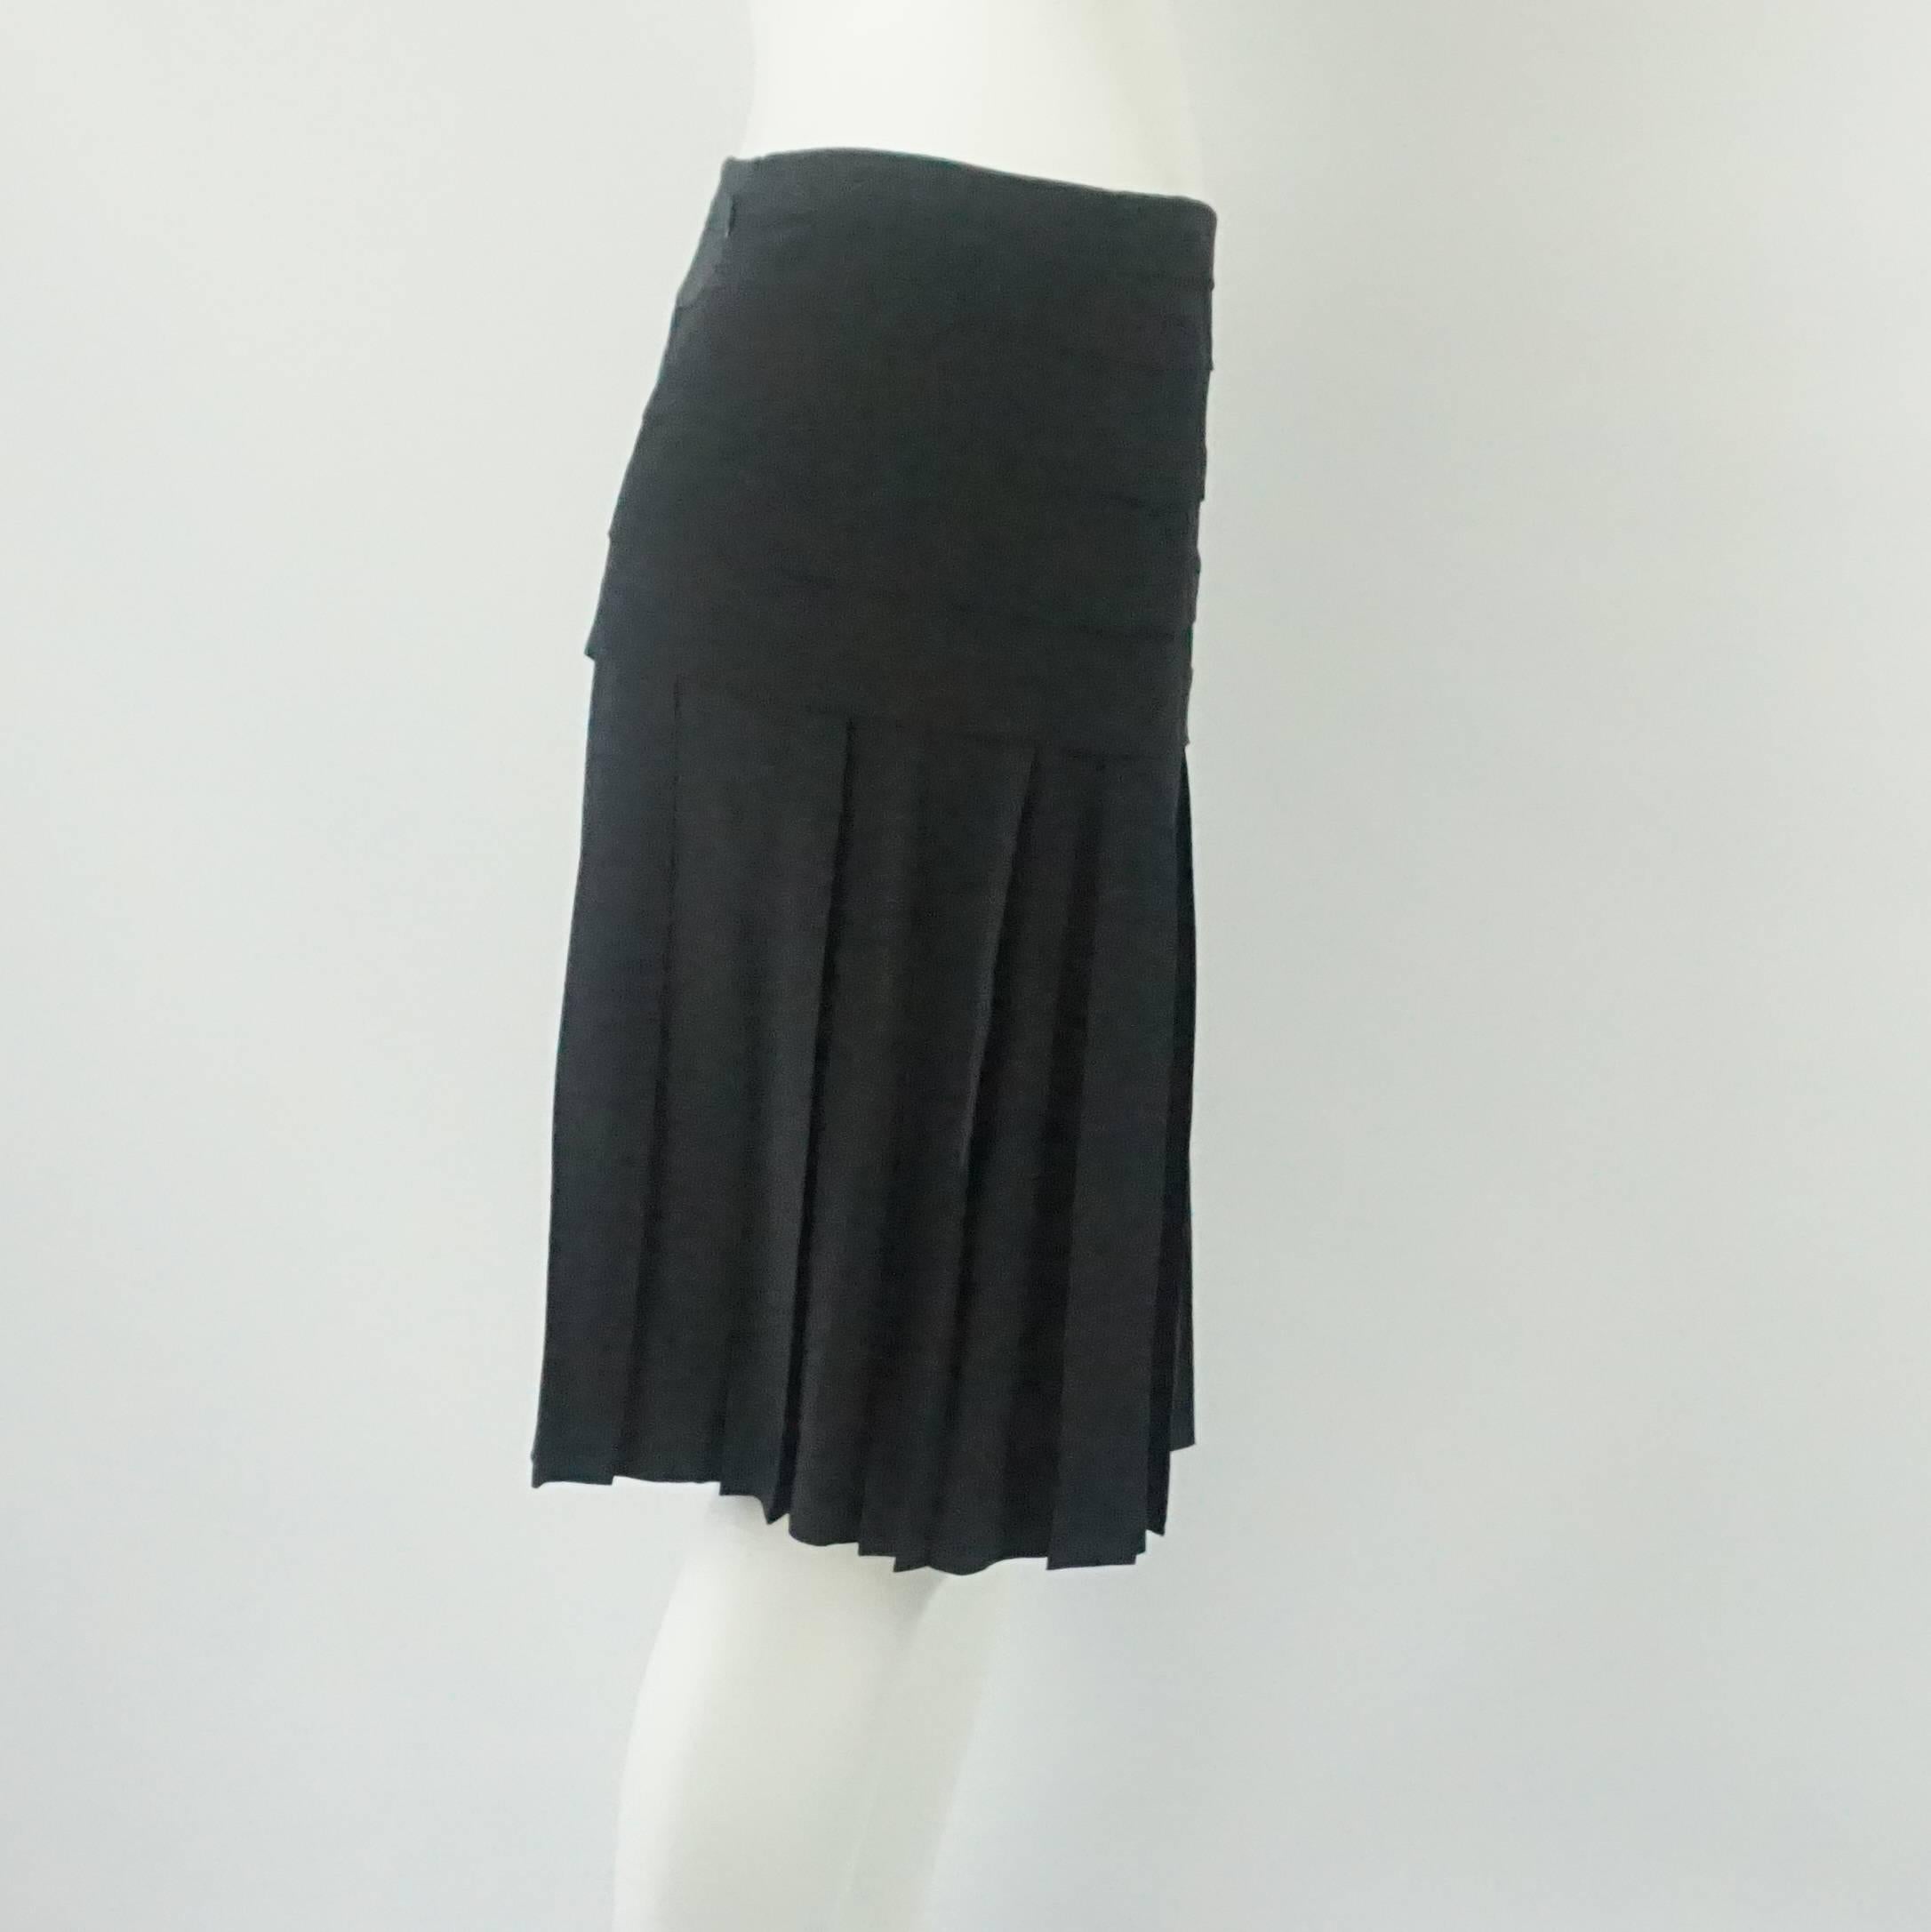 Chanel Black Silk Skirt - 38 - NWT. This Chanel skirt is black and made of silk. It is fitted around the hips and then flares out with pleating. There is a black Chanel logo detail. This skirt is in good condition and NWT with some small presses